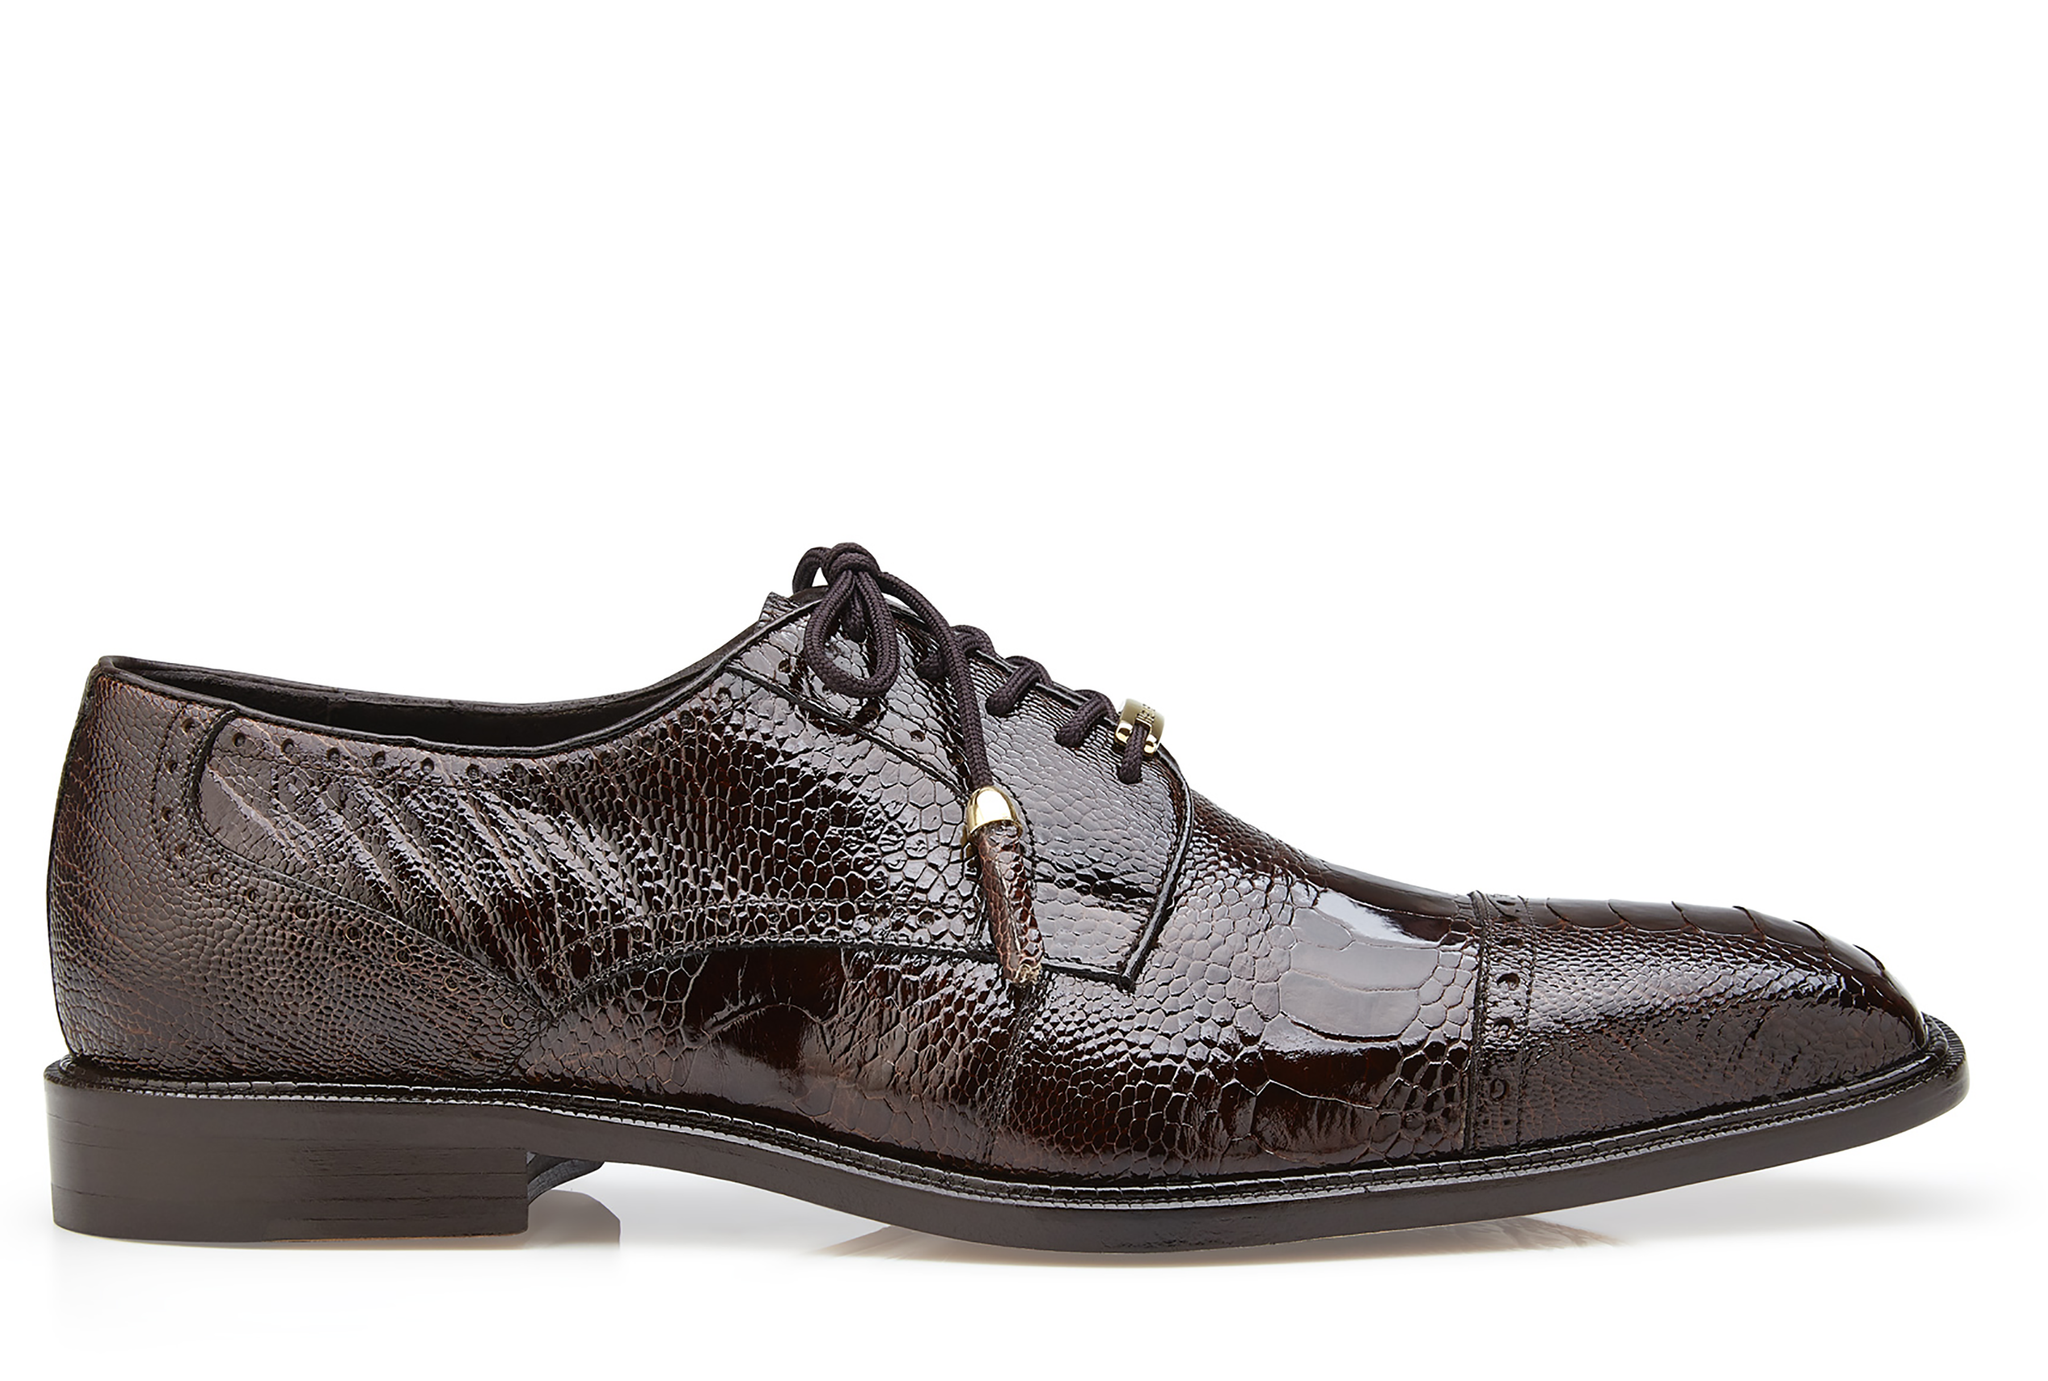 The Ostrich Leather Men's Shoe